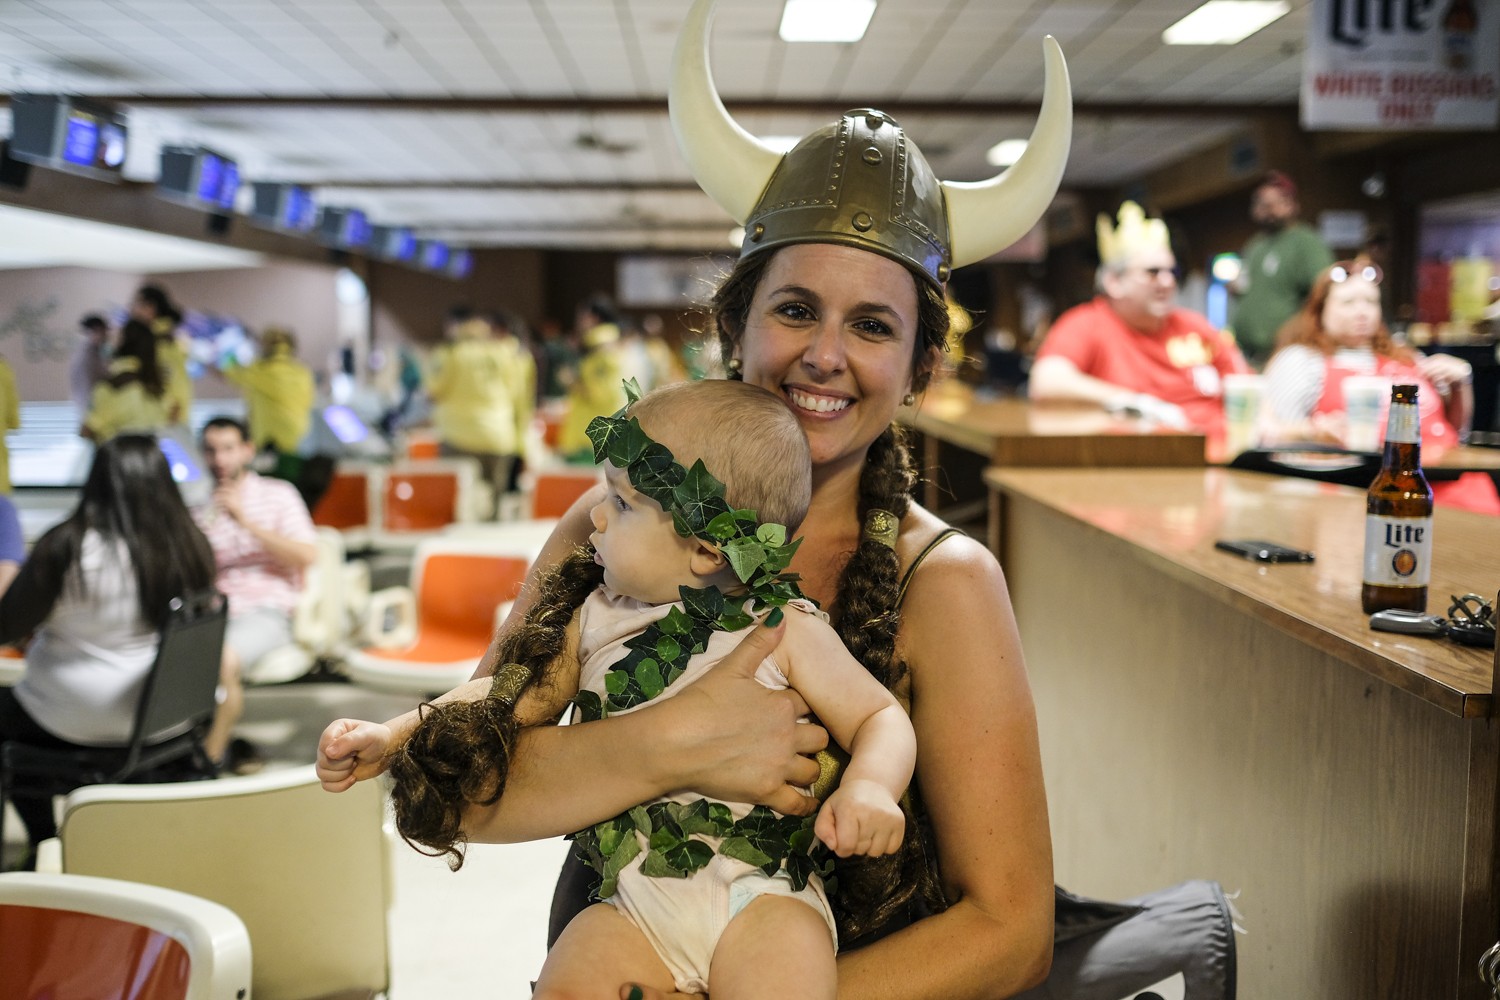 Jessica Knecht and her child Nolan went all out with their costumes for the 16th Annual Lebowski Fest.